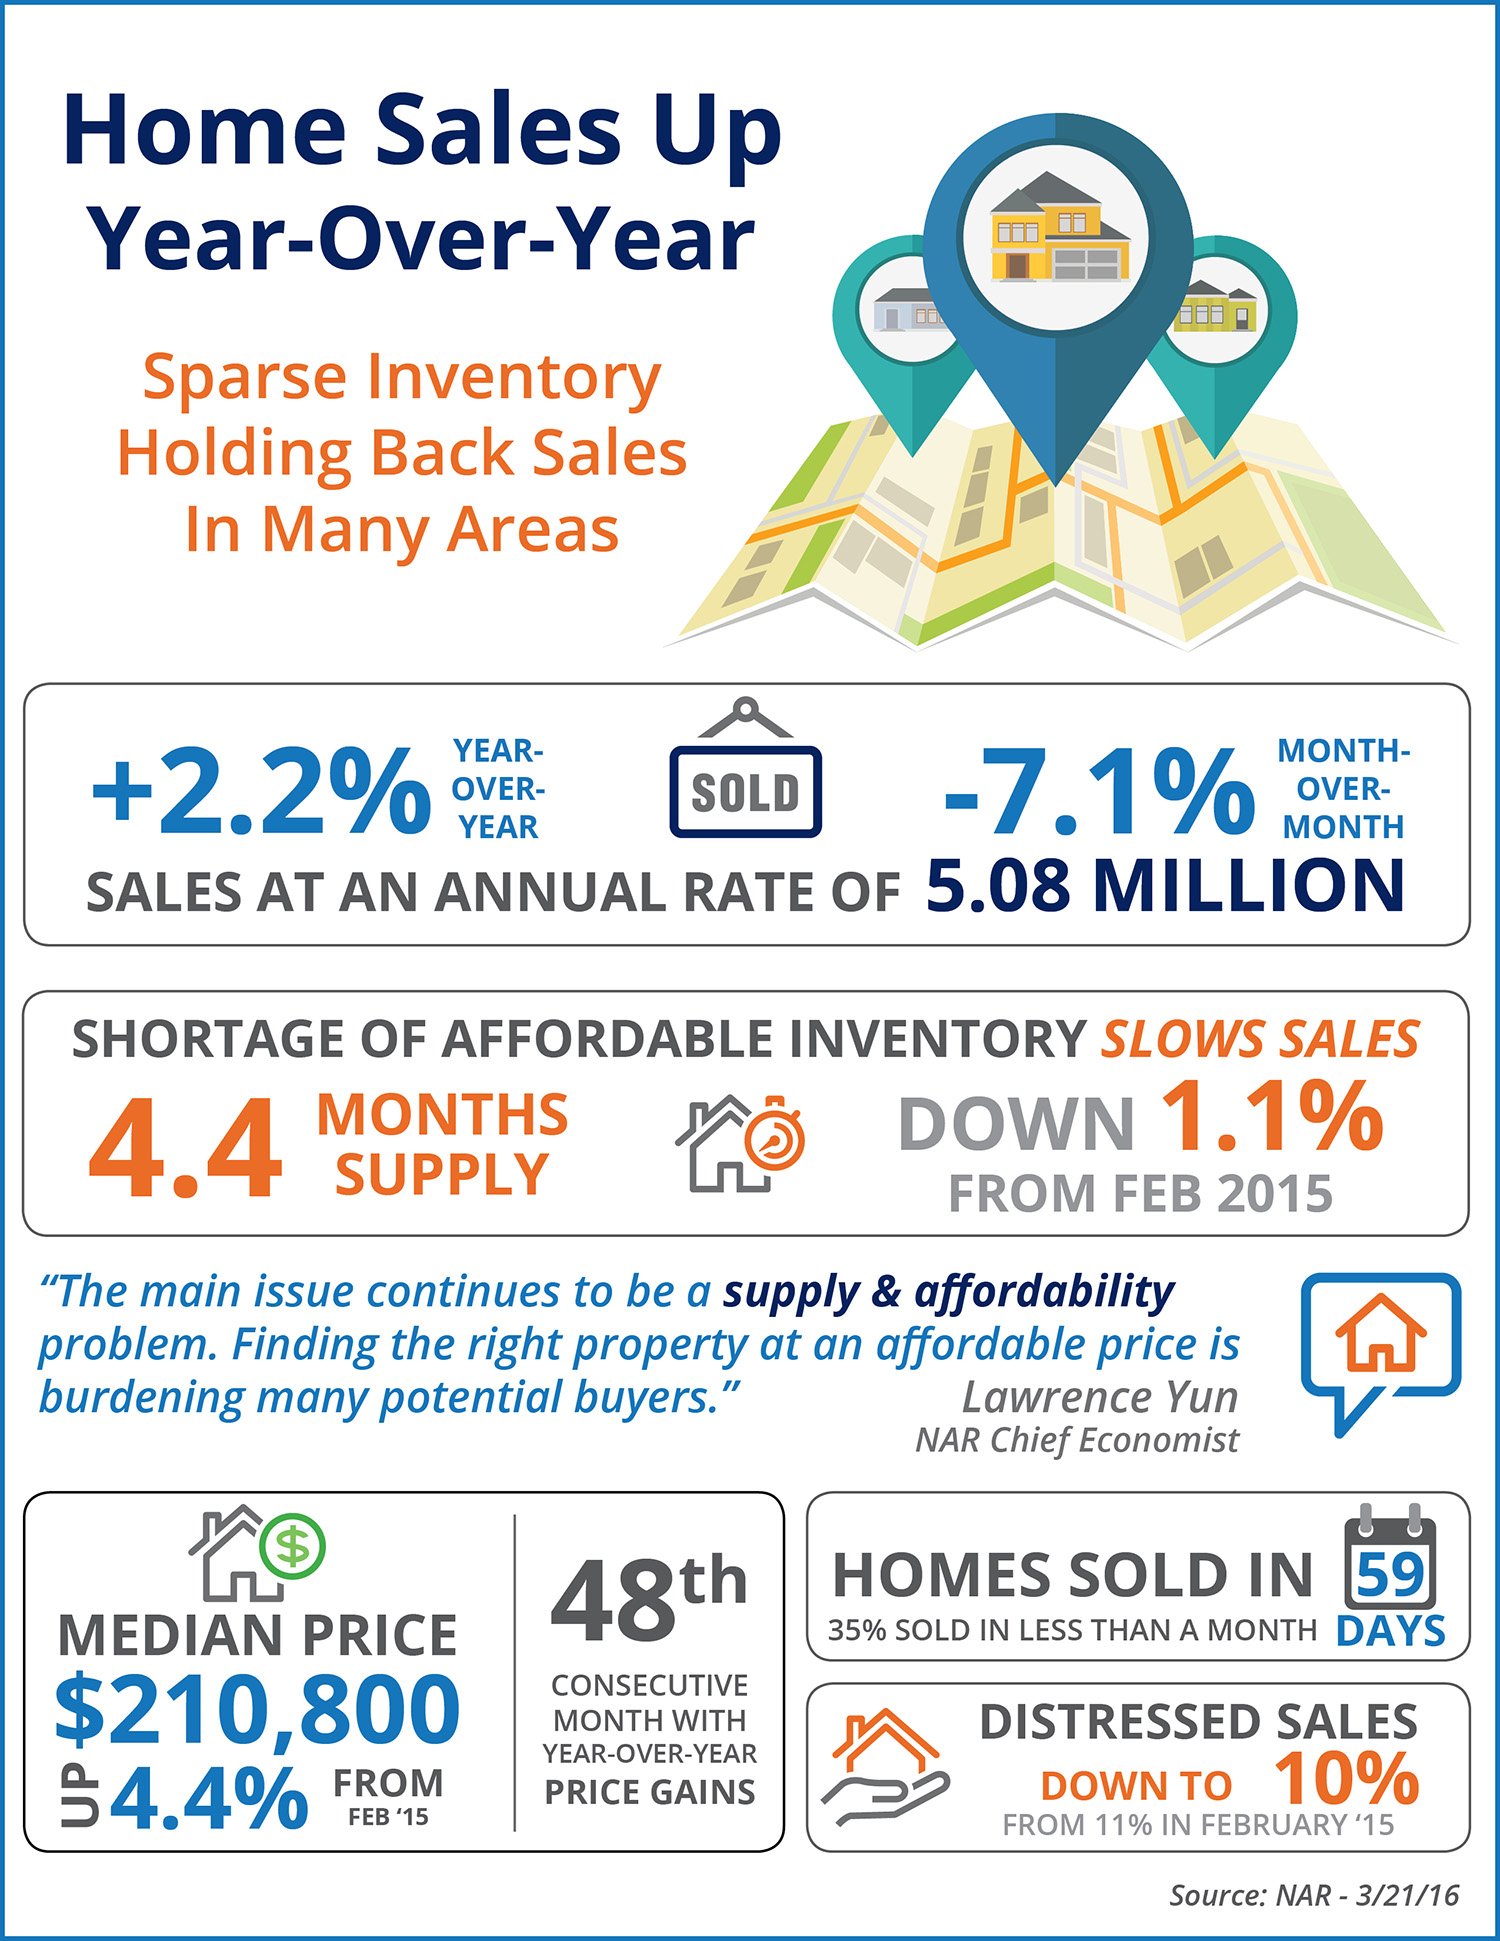 Home Sales Up Year-Over-Year | Simplifying The Market